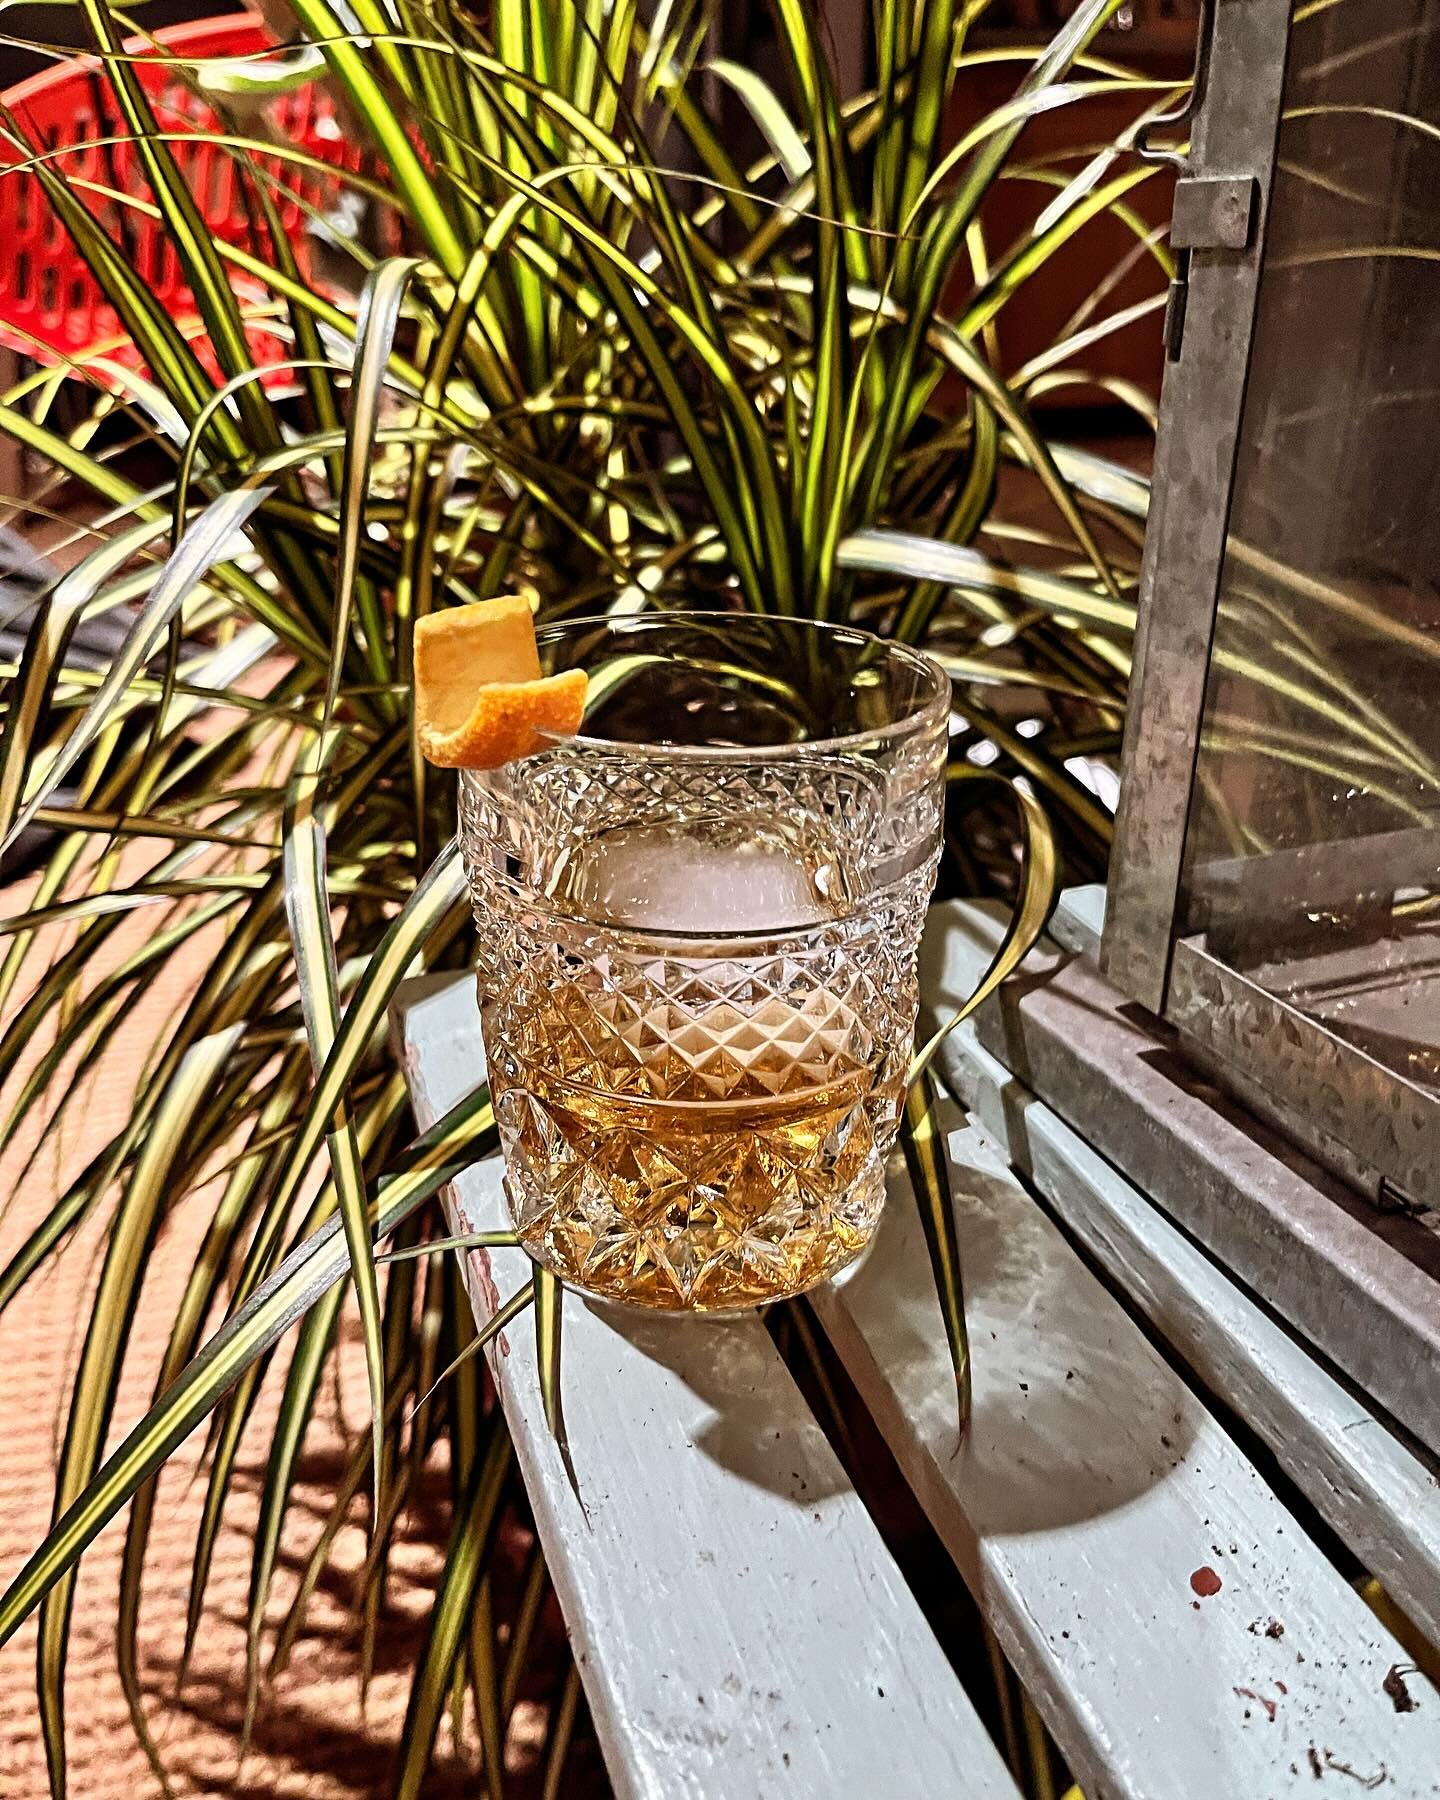 Happy Friday! Time for a #tailoredtipples 

Cock &lsquo;n&rsquo; Bull Special

3/4 oz bourbon
1/2 oz Cognac
3/4 oz B&eacute;n&eacute;dictine
1/4 oz dry cura&ccedil;ao
2 dashes Angostura bitters

Add all of the ingredients into a rocks glass with a la